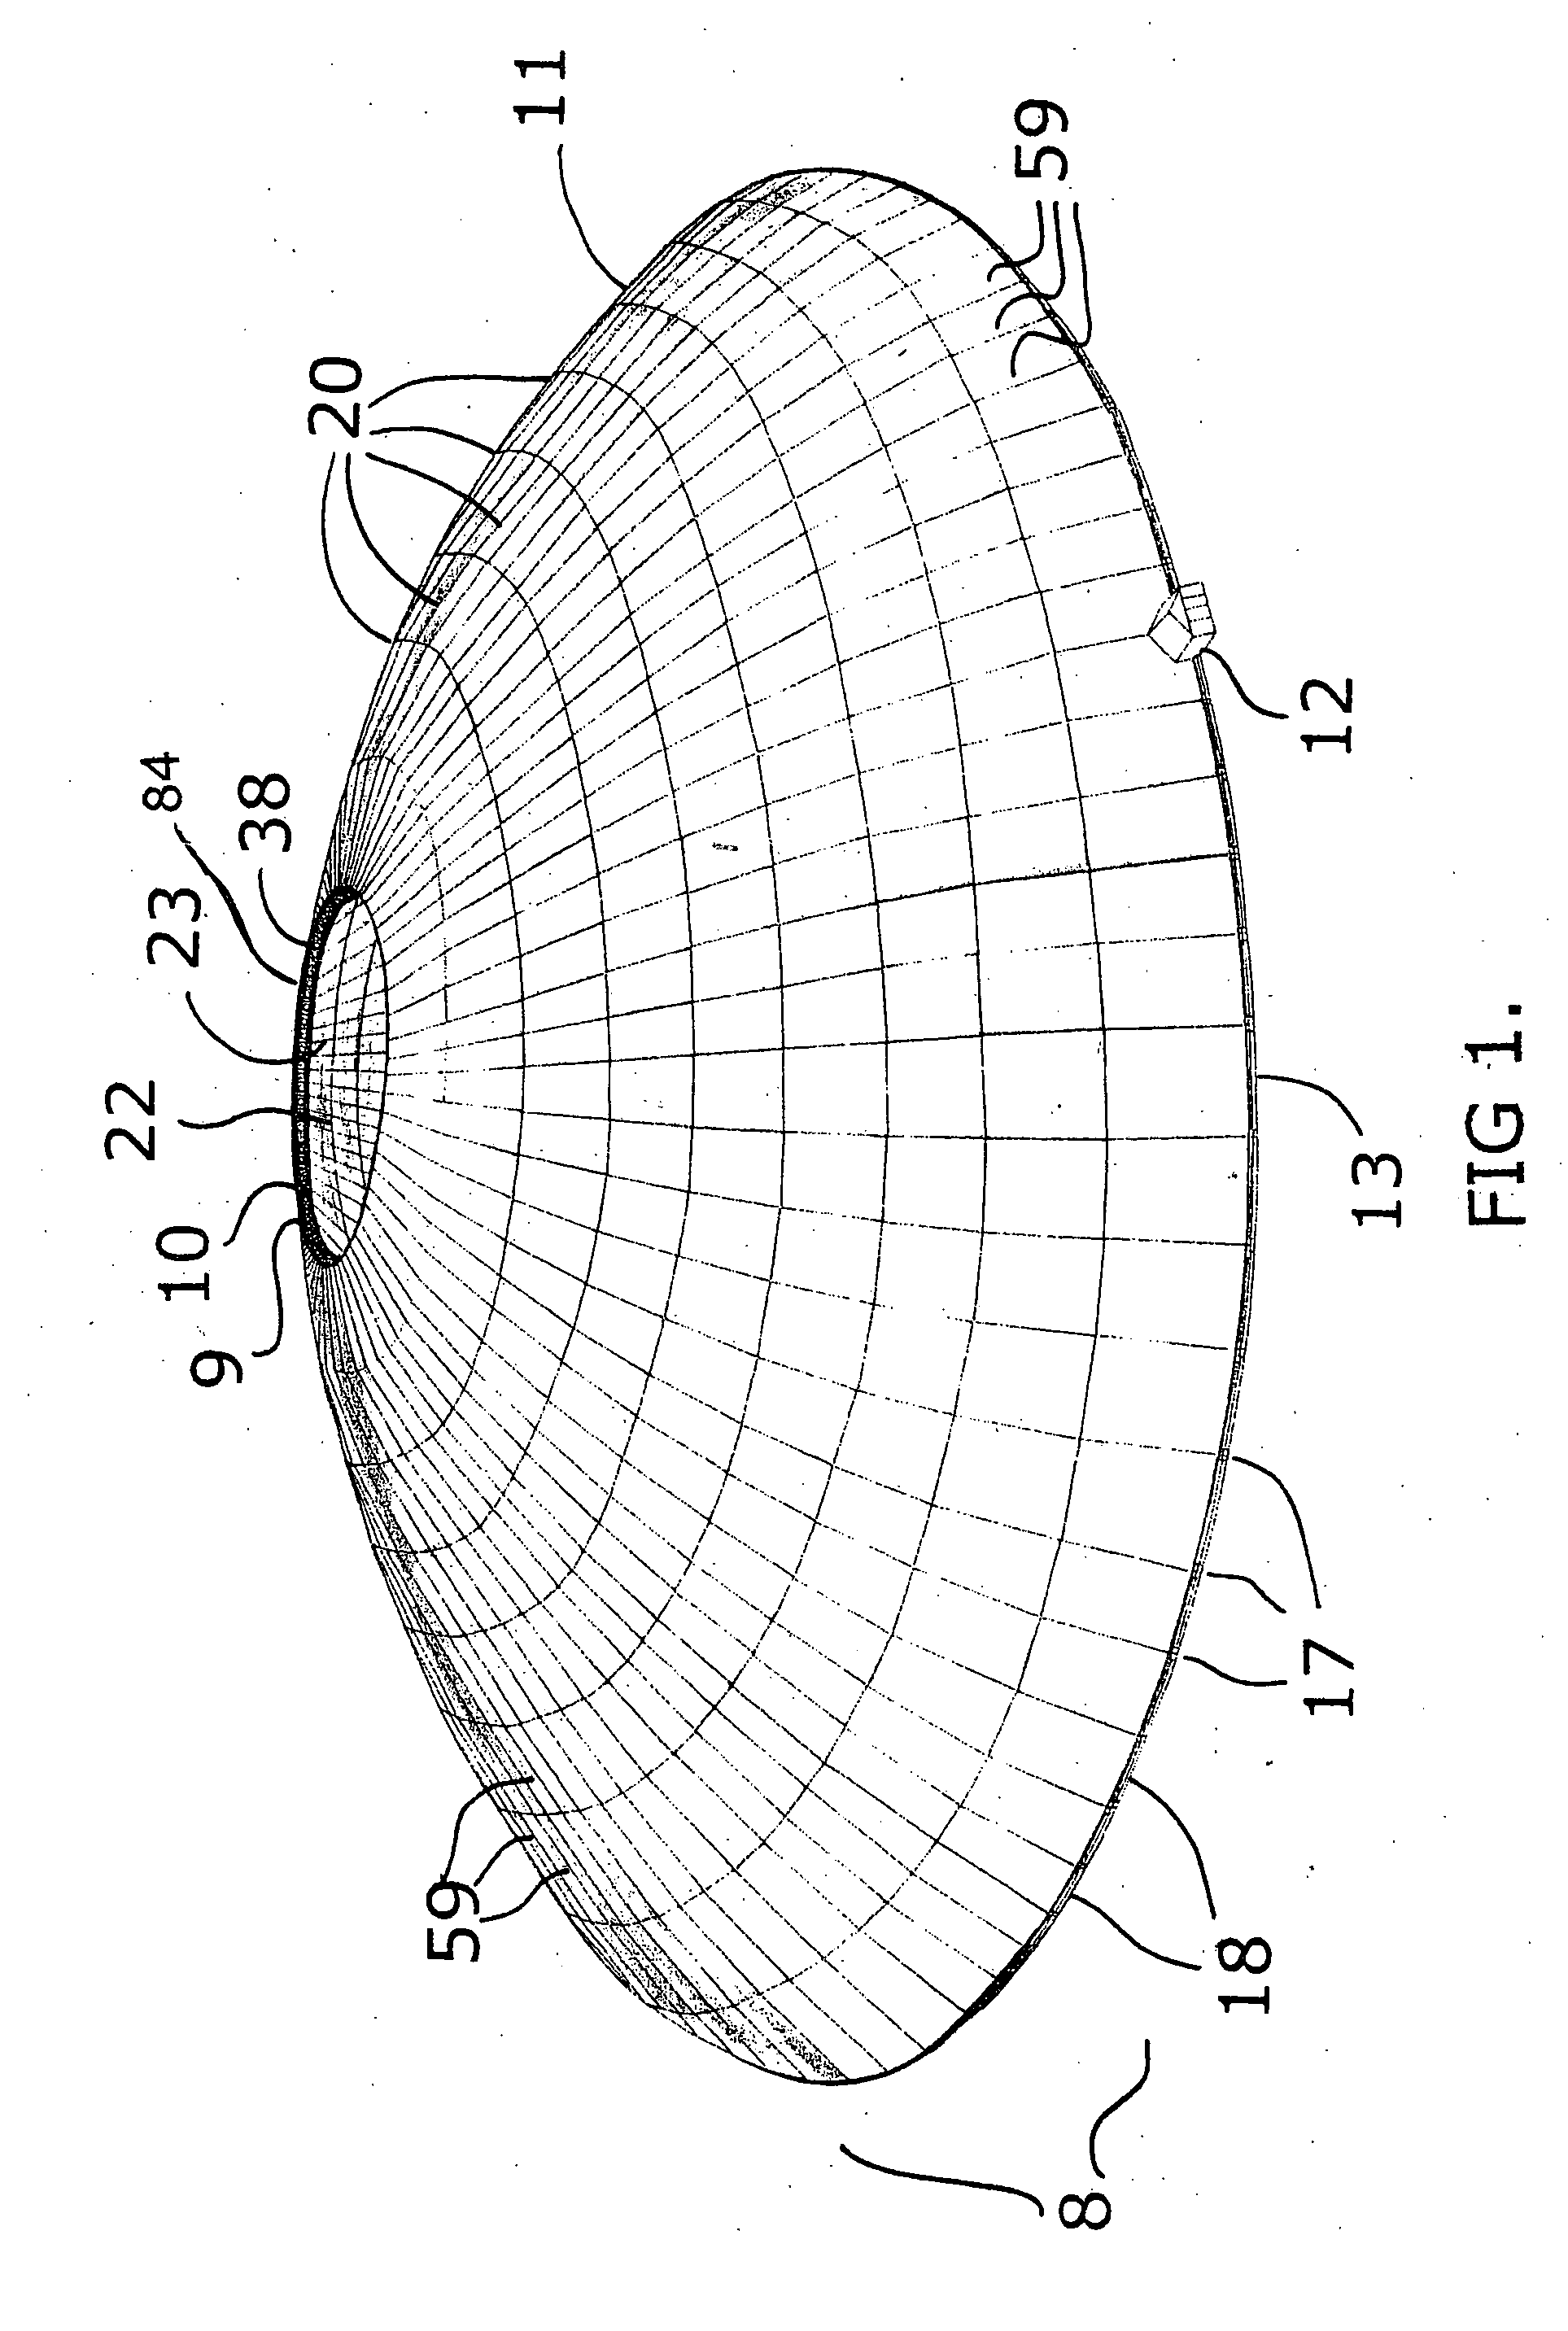 Trilithic and/or twin shell dome type structures and method of making same